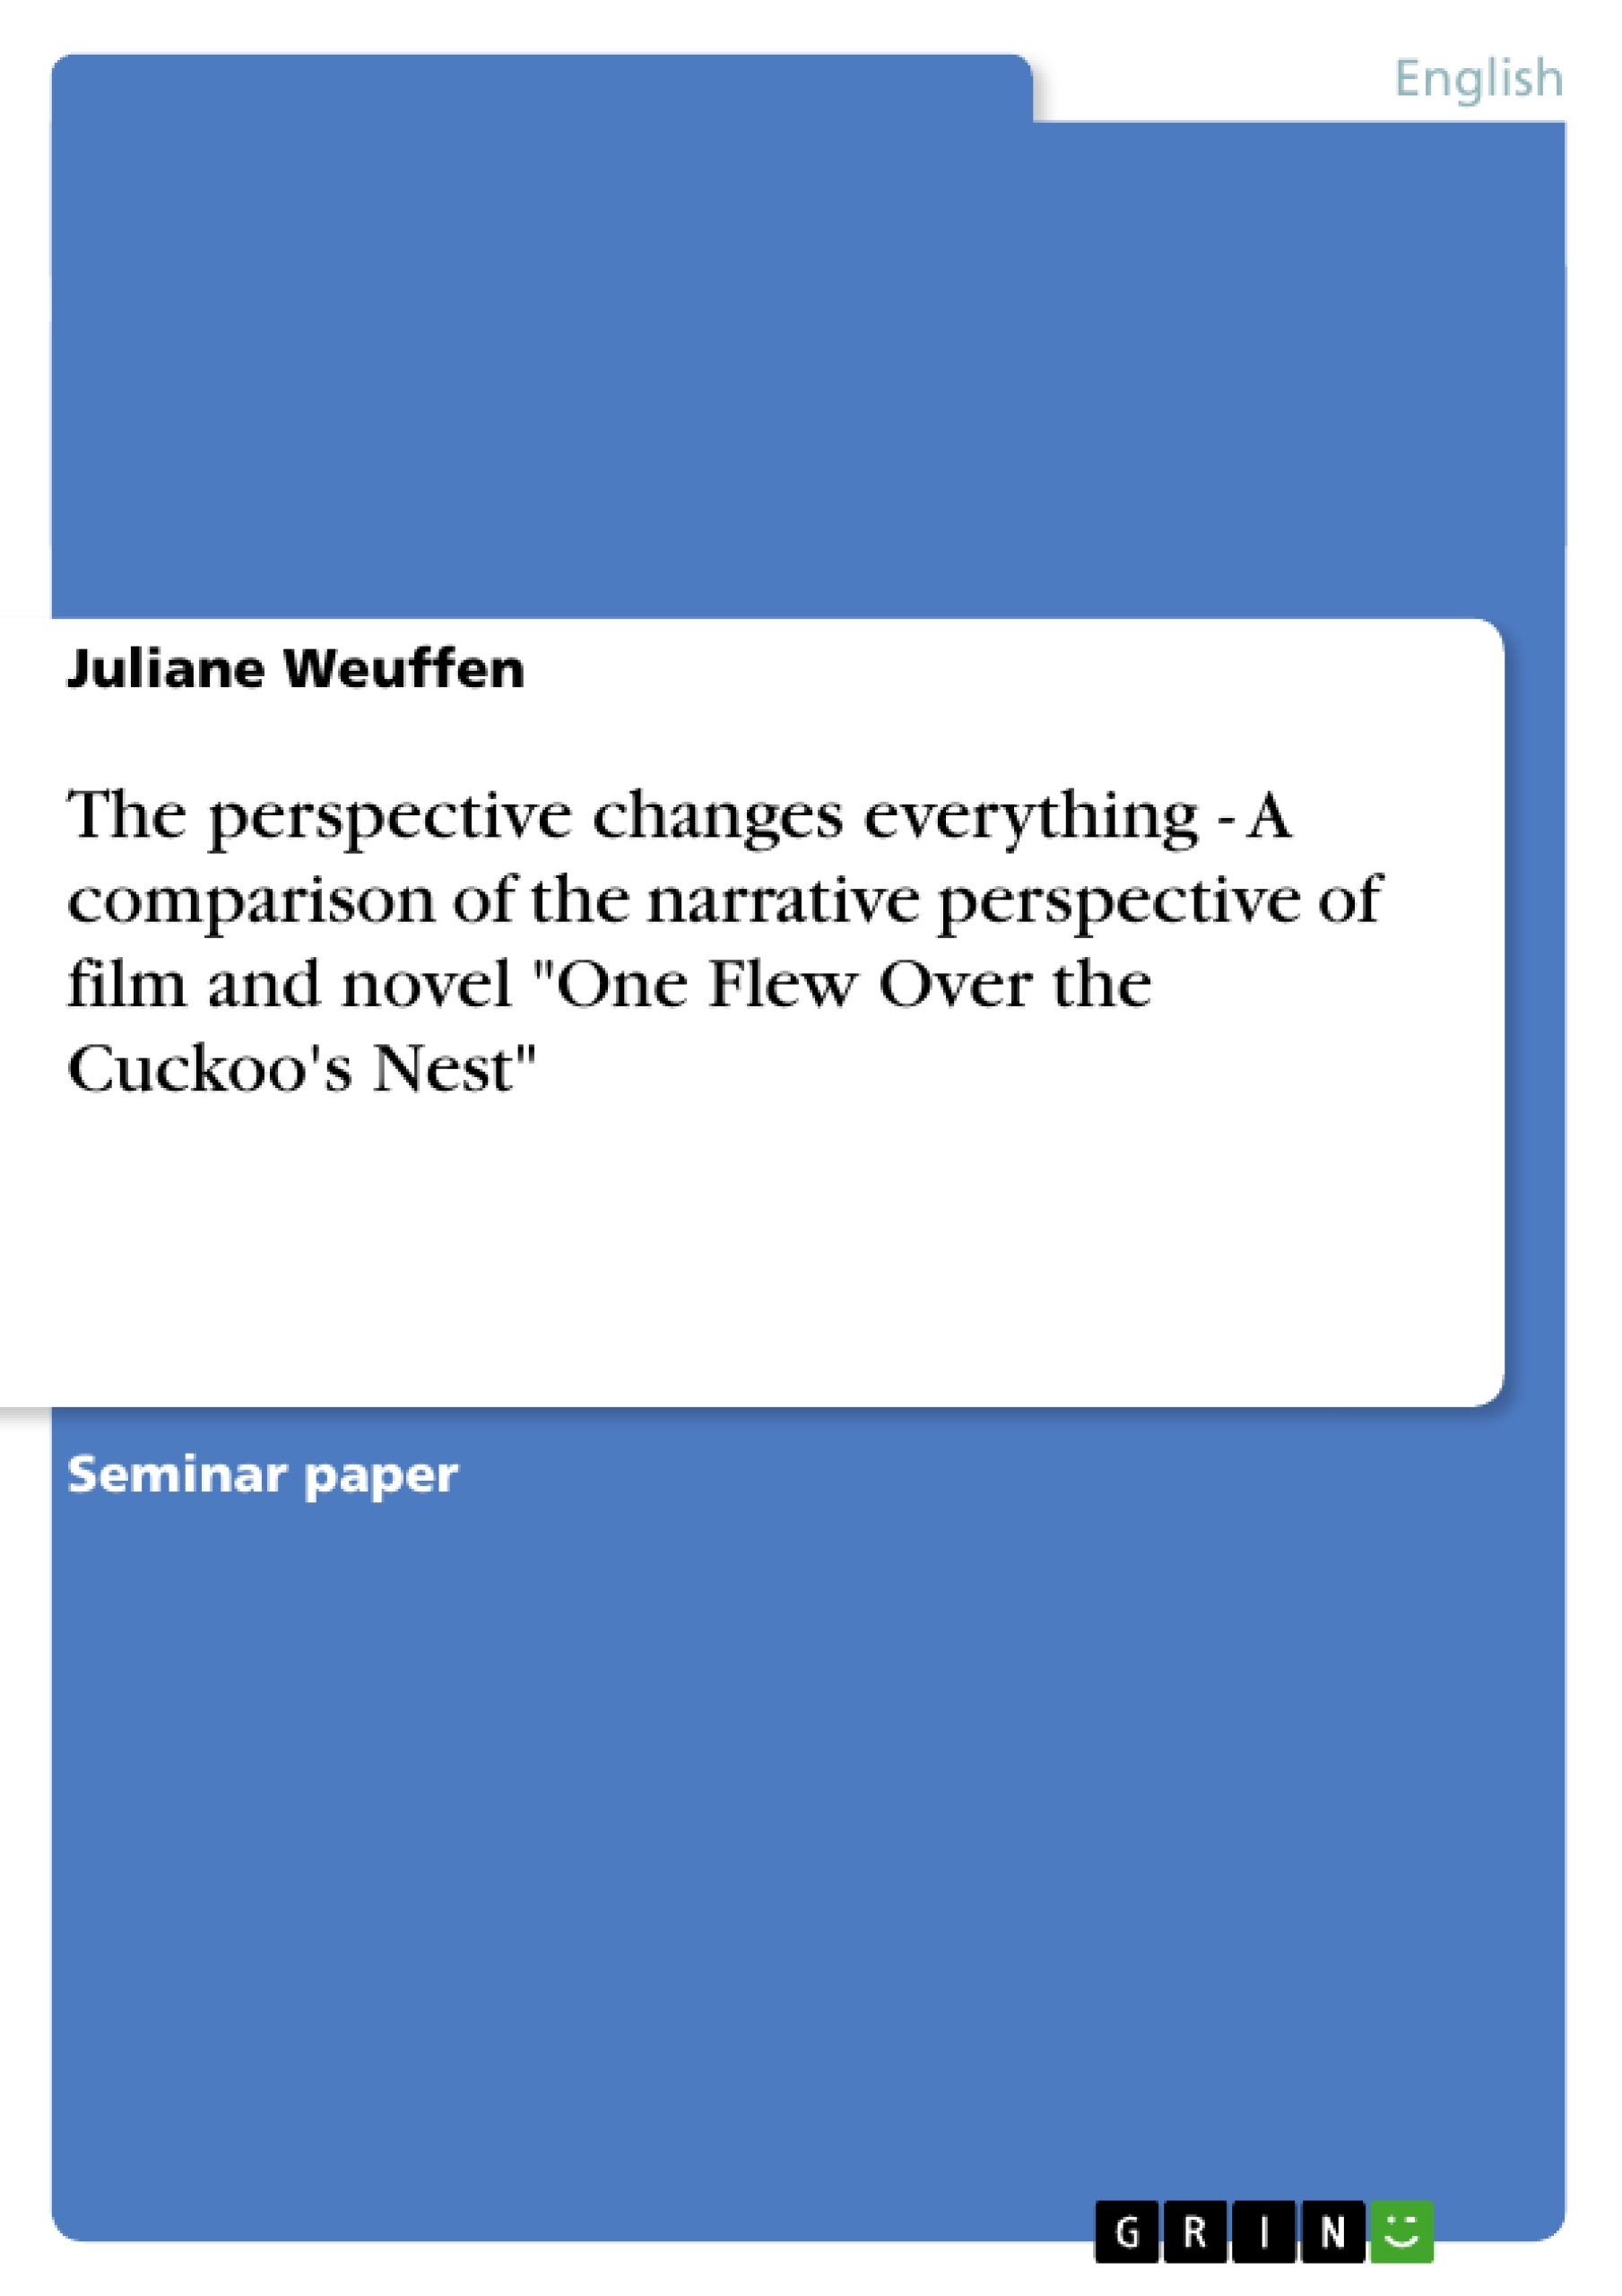 Title: The perspective changes everything - A comparison of the narrative perspective of film and novel "One Flew Over the Cuckoo's Nest"